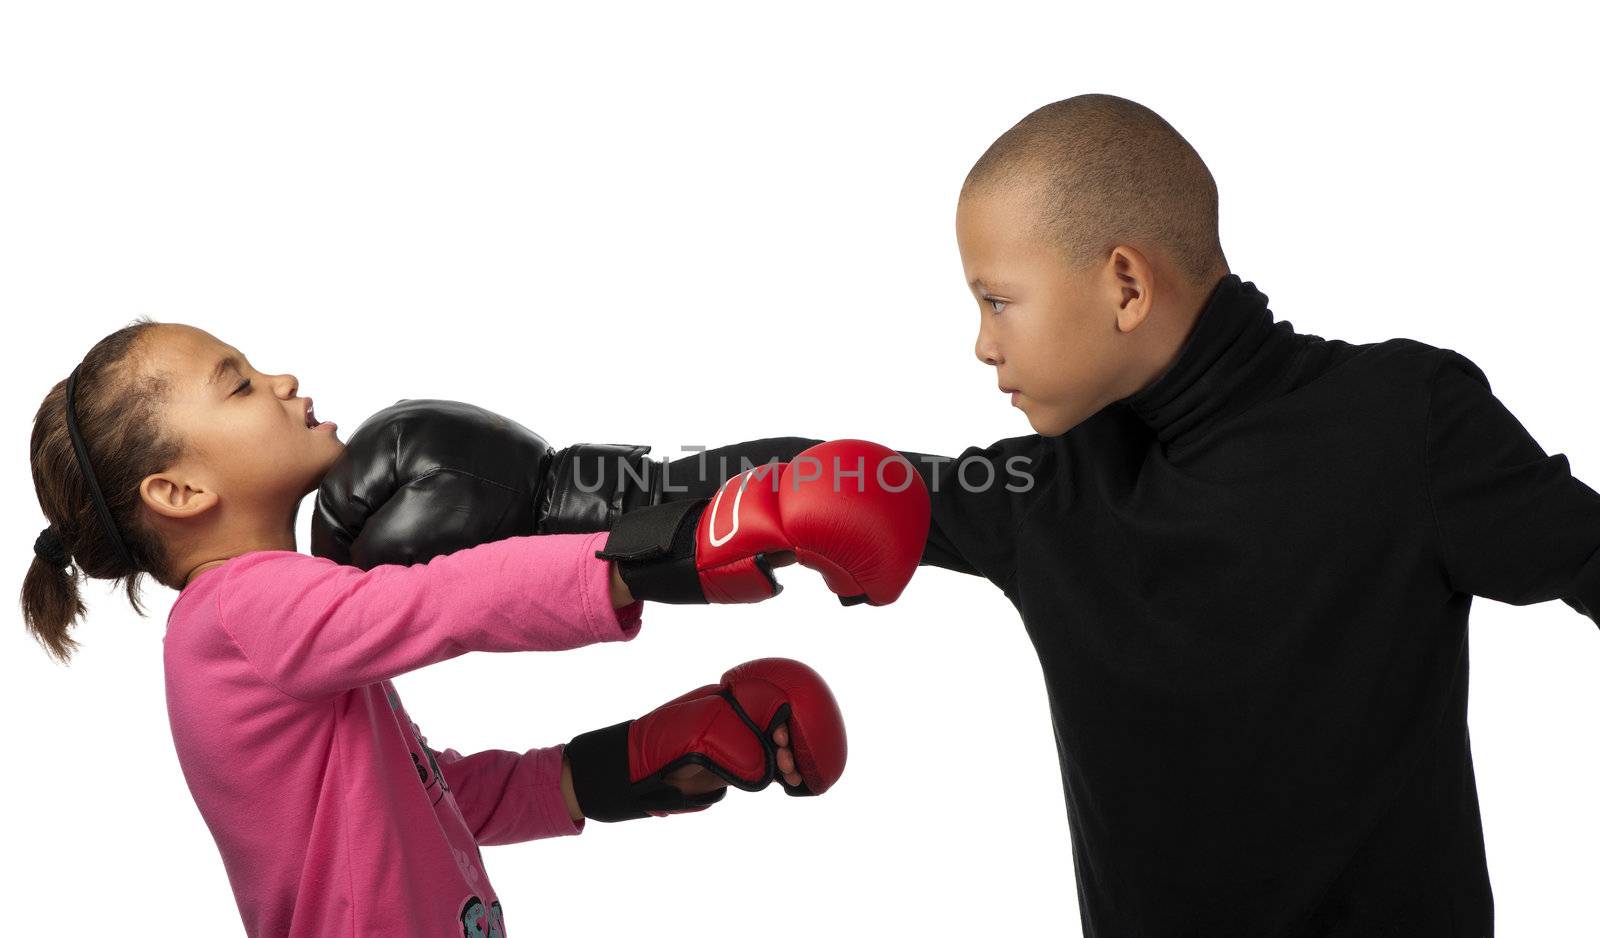 A boy punches a girl on the chin during a boxing contest.